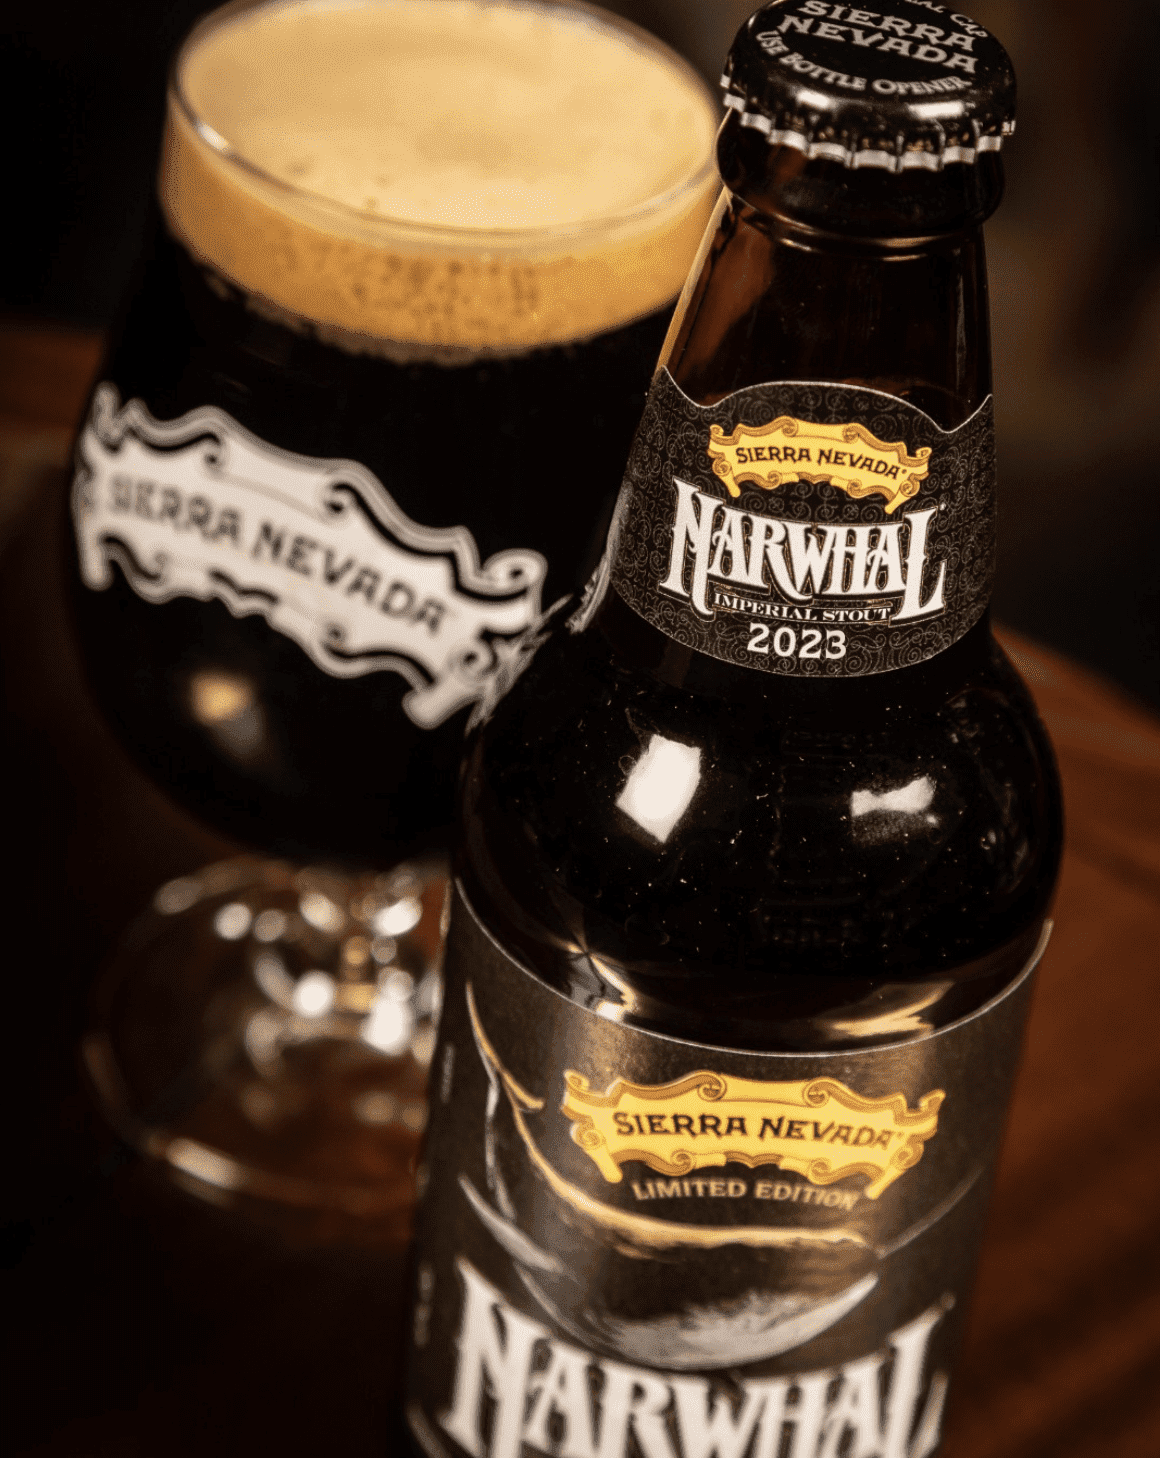 A close-up shot of a pint of Narwhal in a glass, sitting next to the bottle